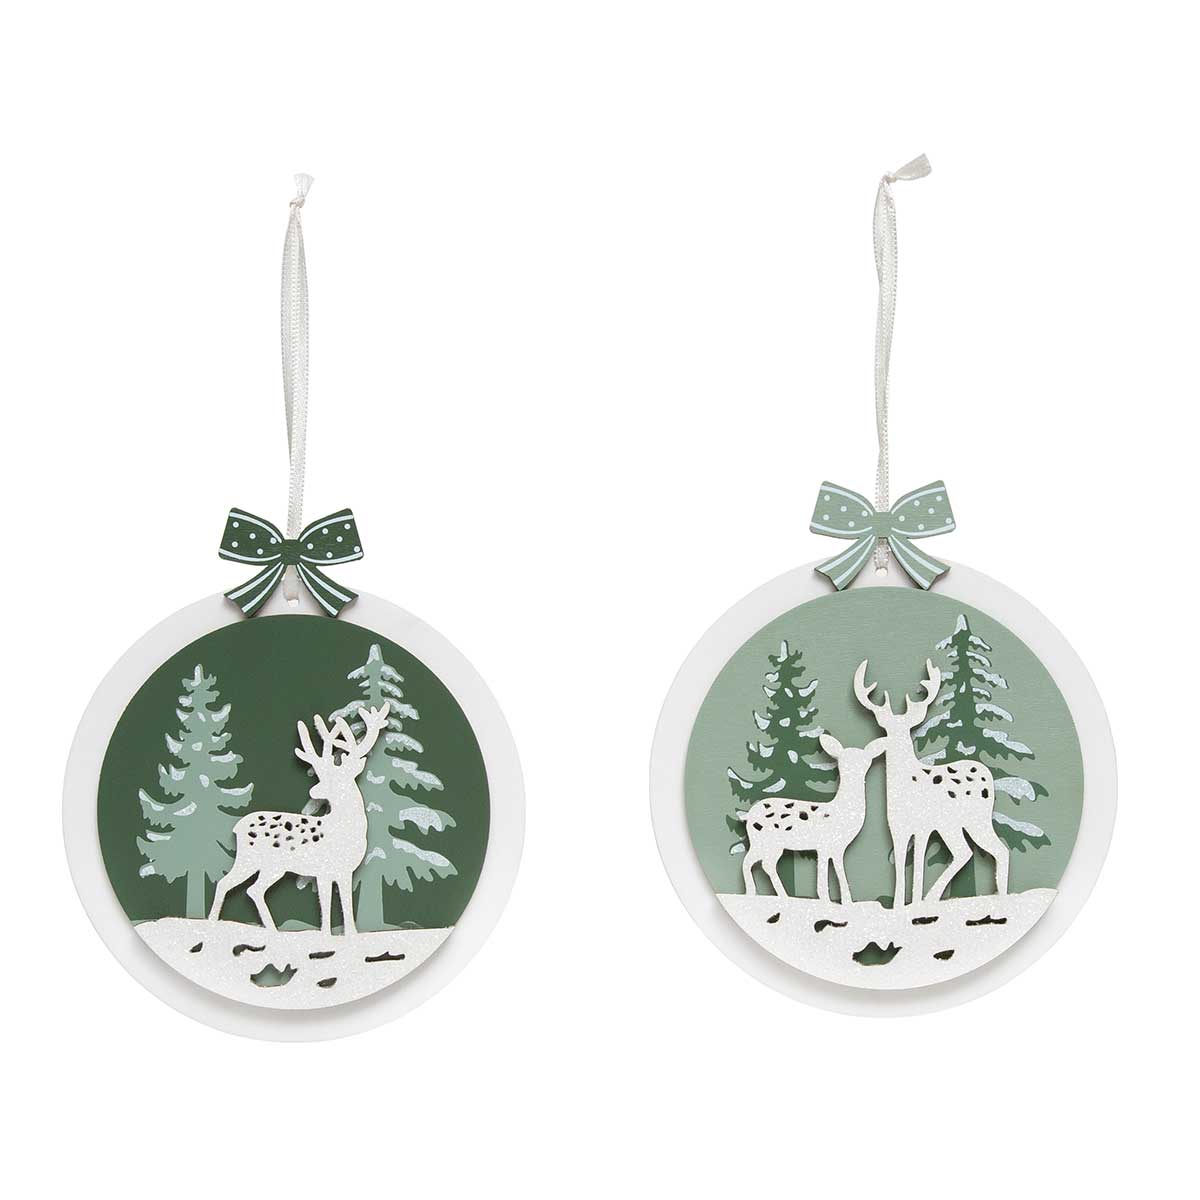 DEER ROUND ORNAMENT GREEN/WHITE 2 AST